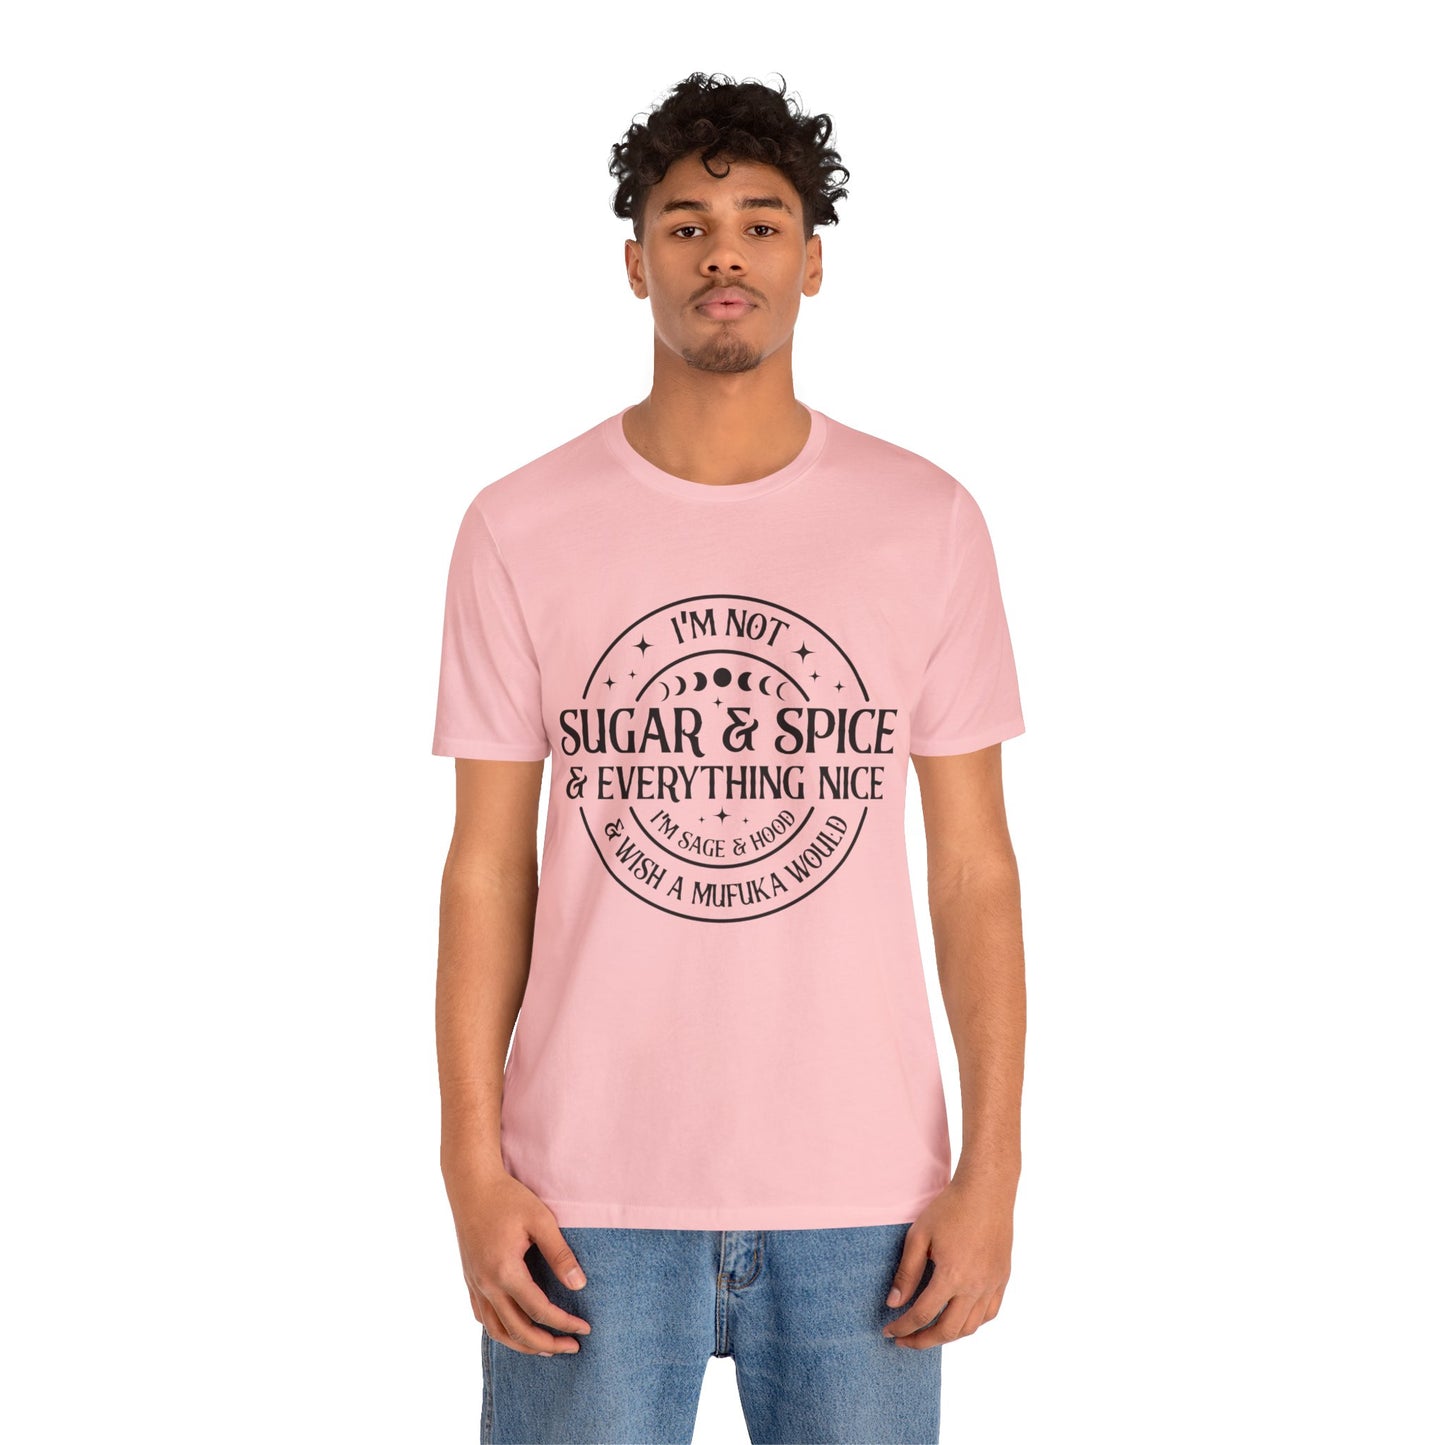 Unisex Jersey Short Sleeve Tee'm not Sugar and Spice